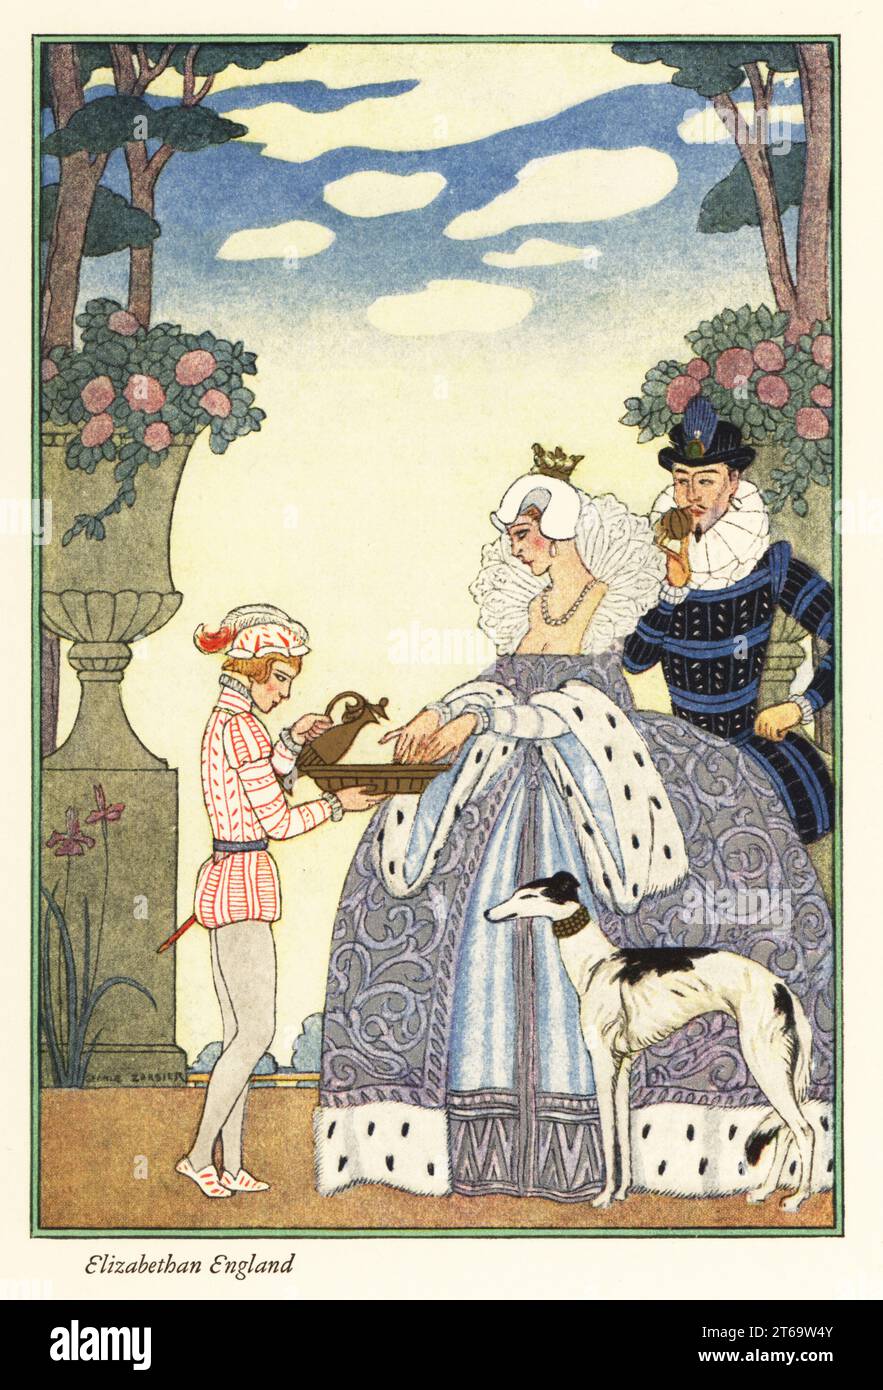 Queen Elizabeth of England washes her hands in a bowl held by her page boy in a garden. A courtier in a ruff collar sniffs a clove orange beside her. Smithsonian-process colour print after Art Deco master George Barbier from Richard le Galliennes Romance of Perfume, Hudnut, New York, 1928. Stock Photo